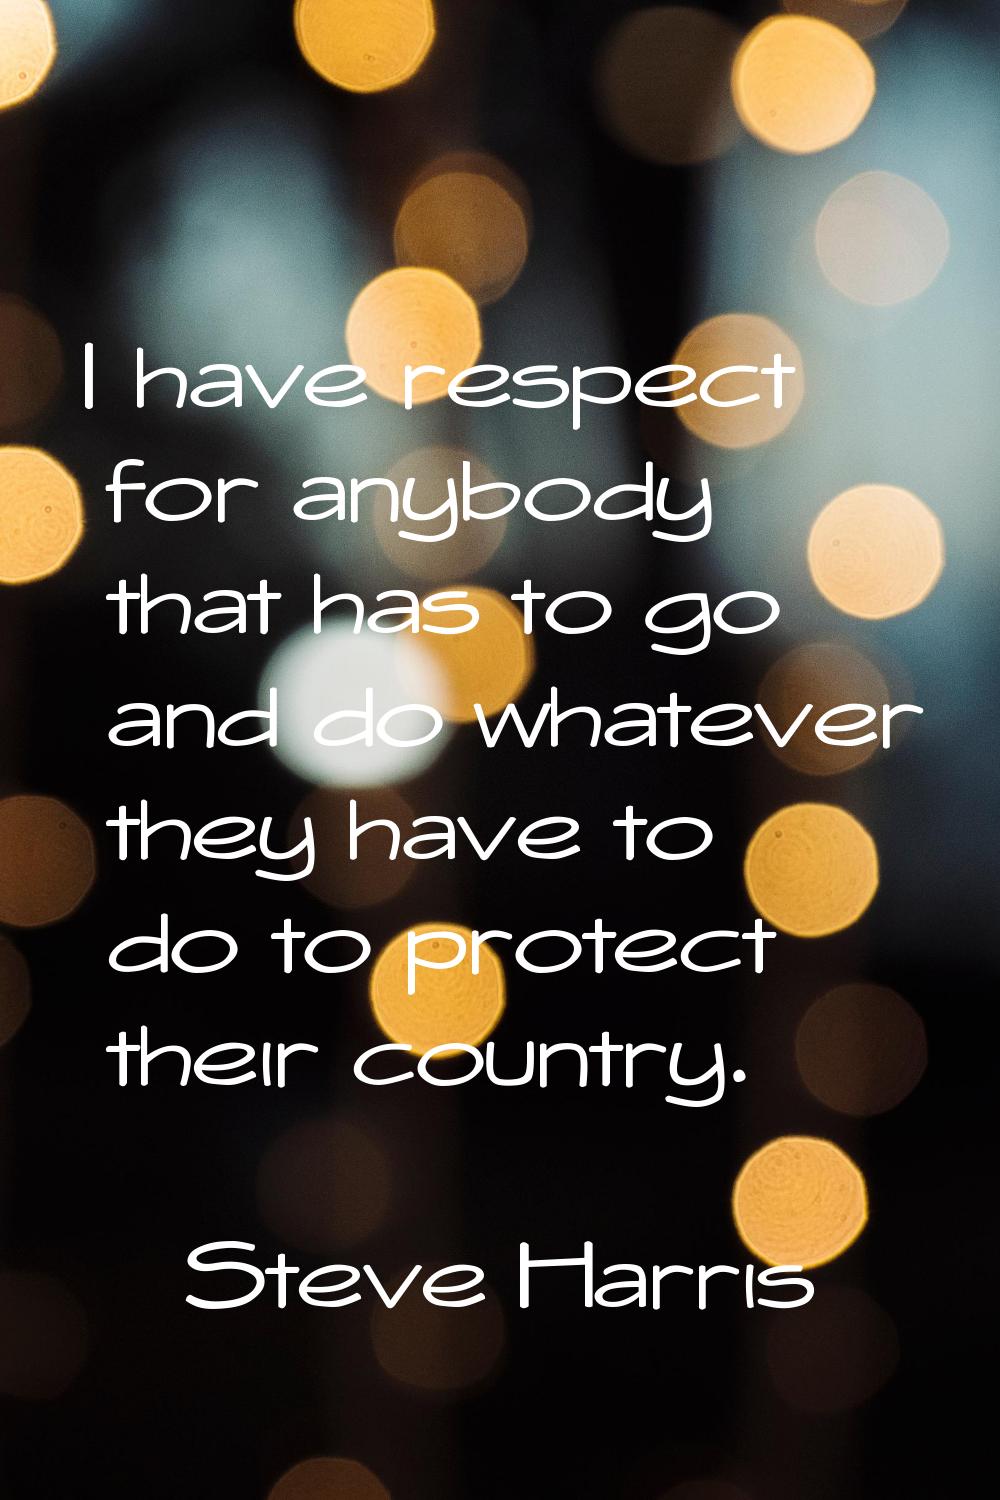 I have respect for anybody that has to go and do whatever they have to do to protect their country.